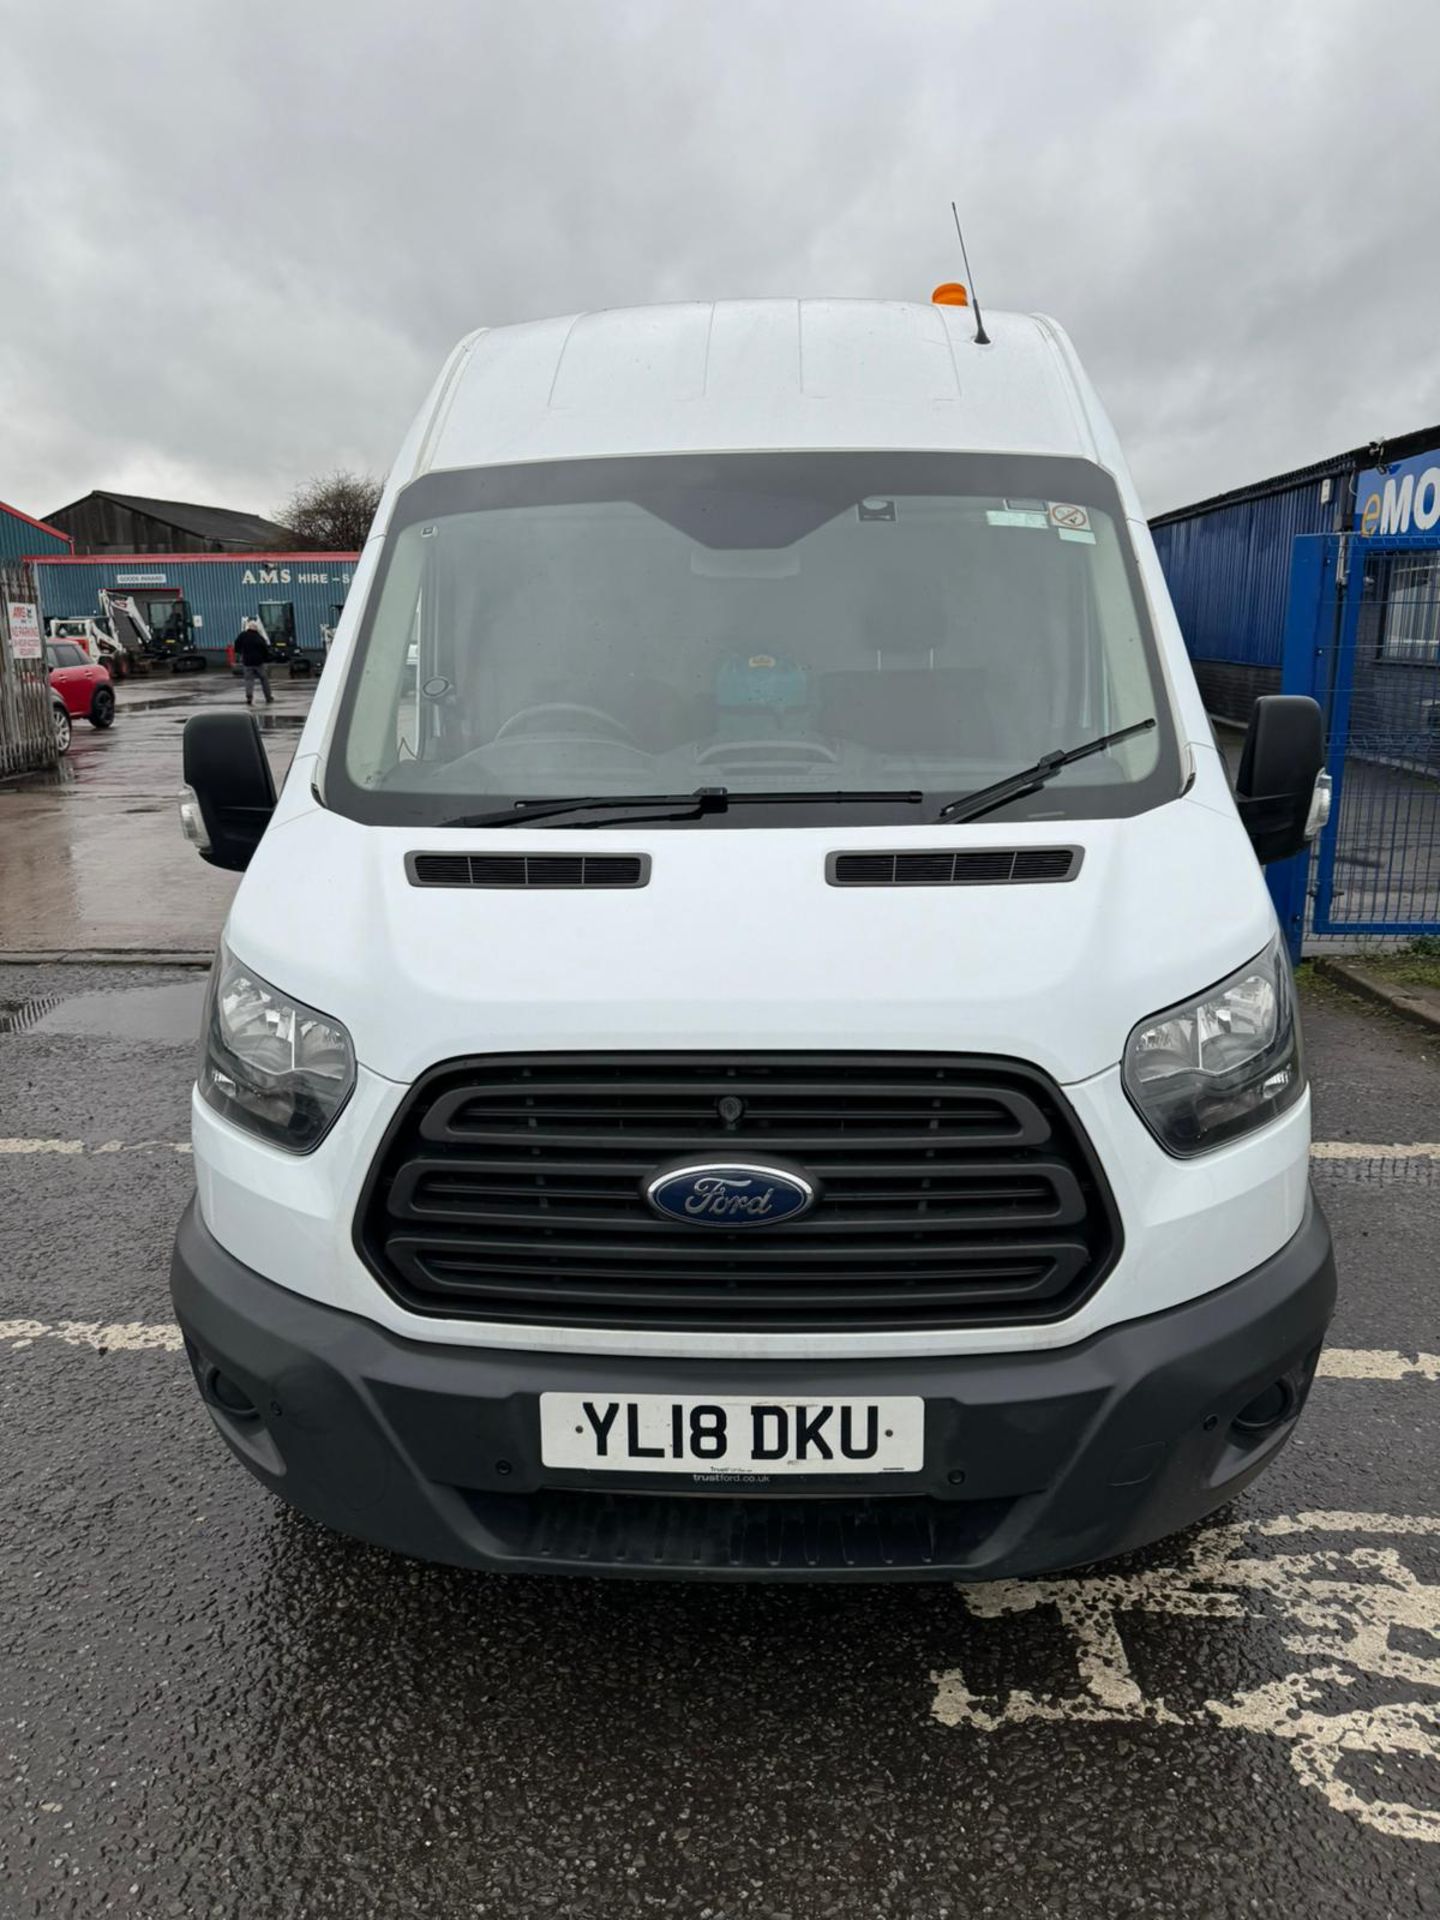 2018 18 FORD TRANSIT 350 PANEL VAN - 97K MILES - L2 H3 FWD - AIR CON - IDEAL CAMPER CONVERSION - Image 7 of 10